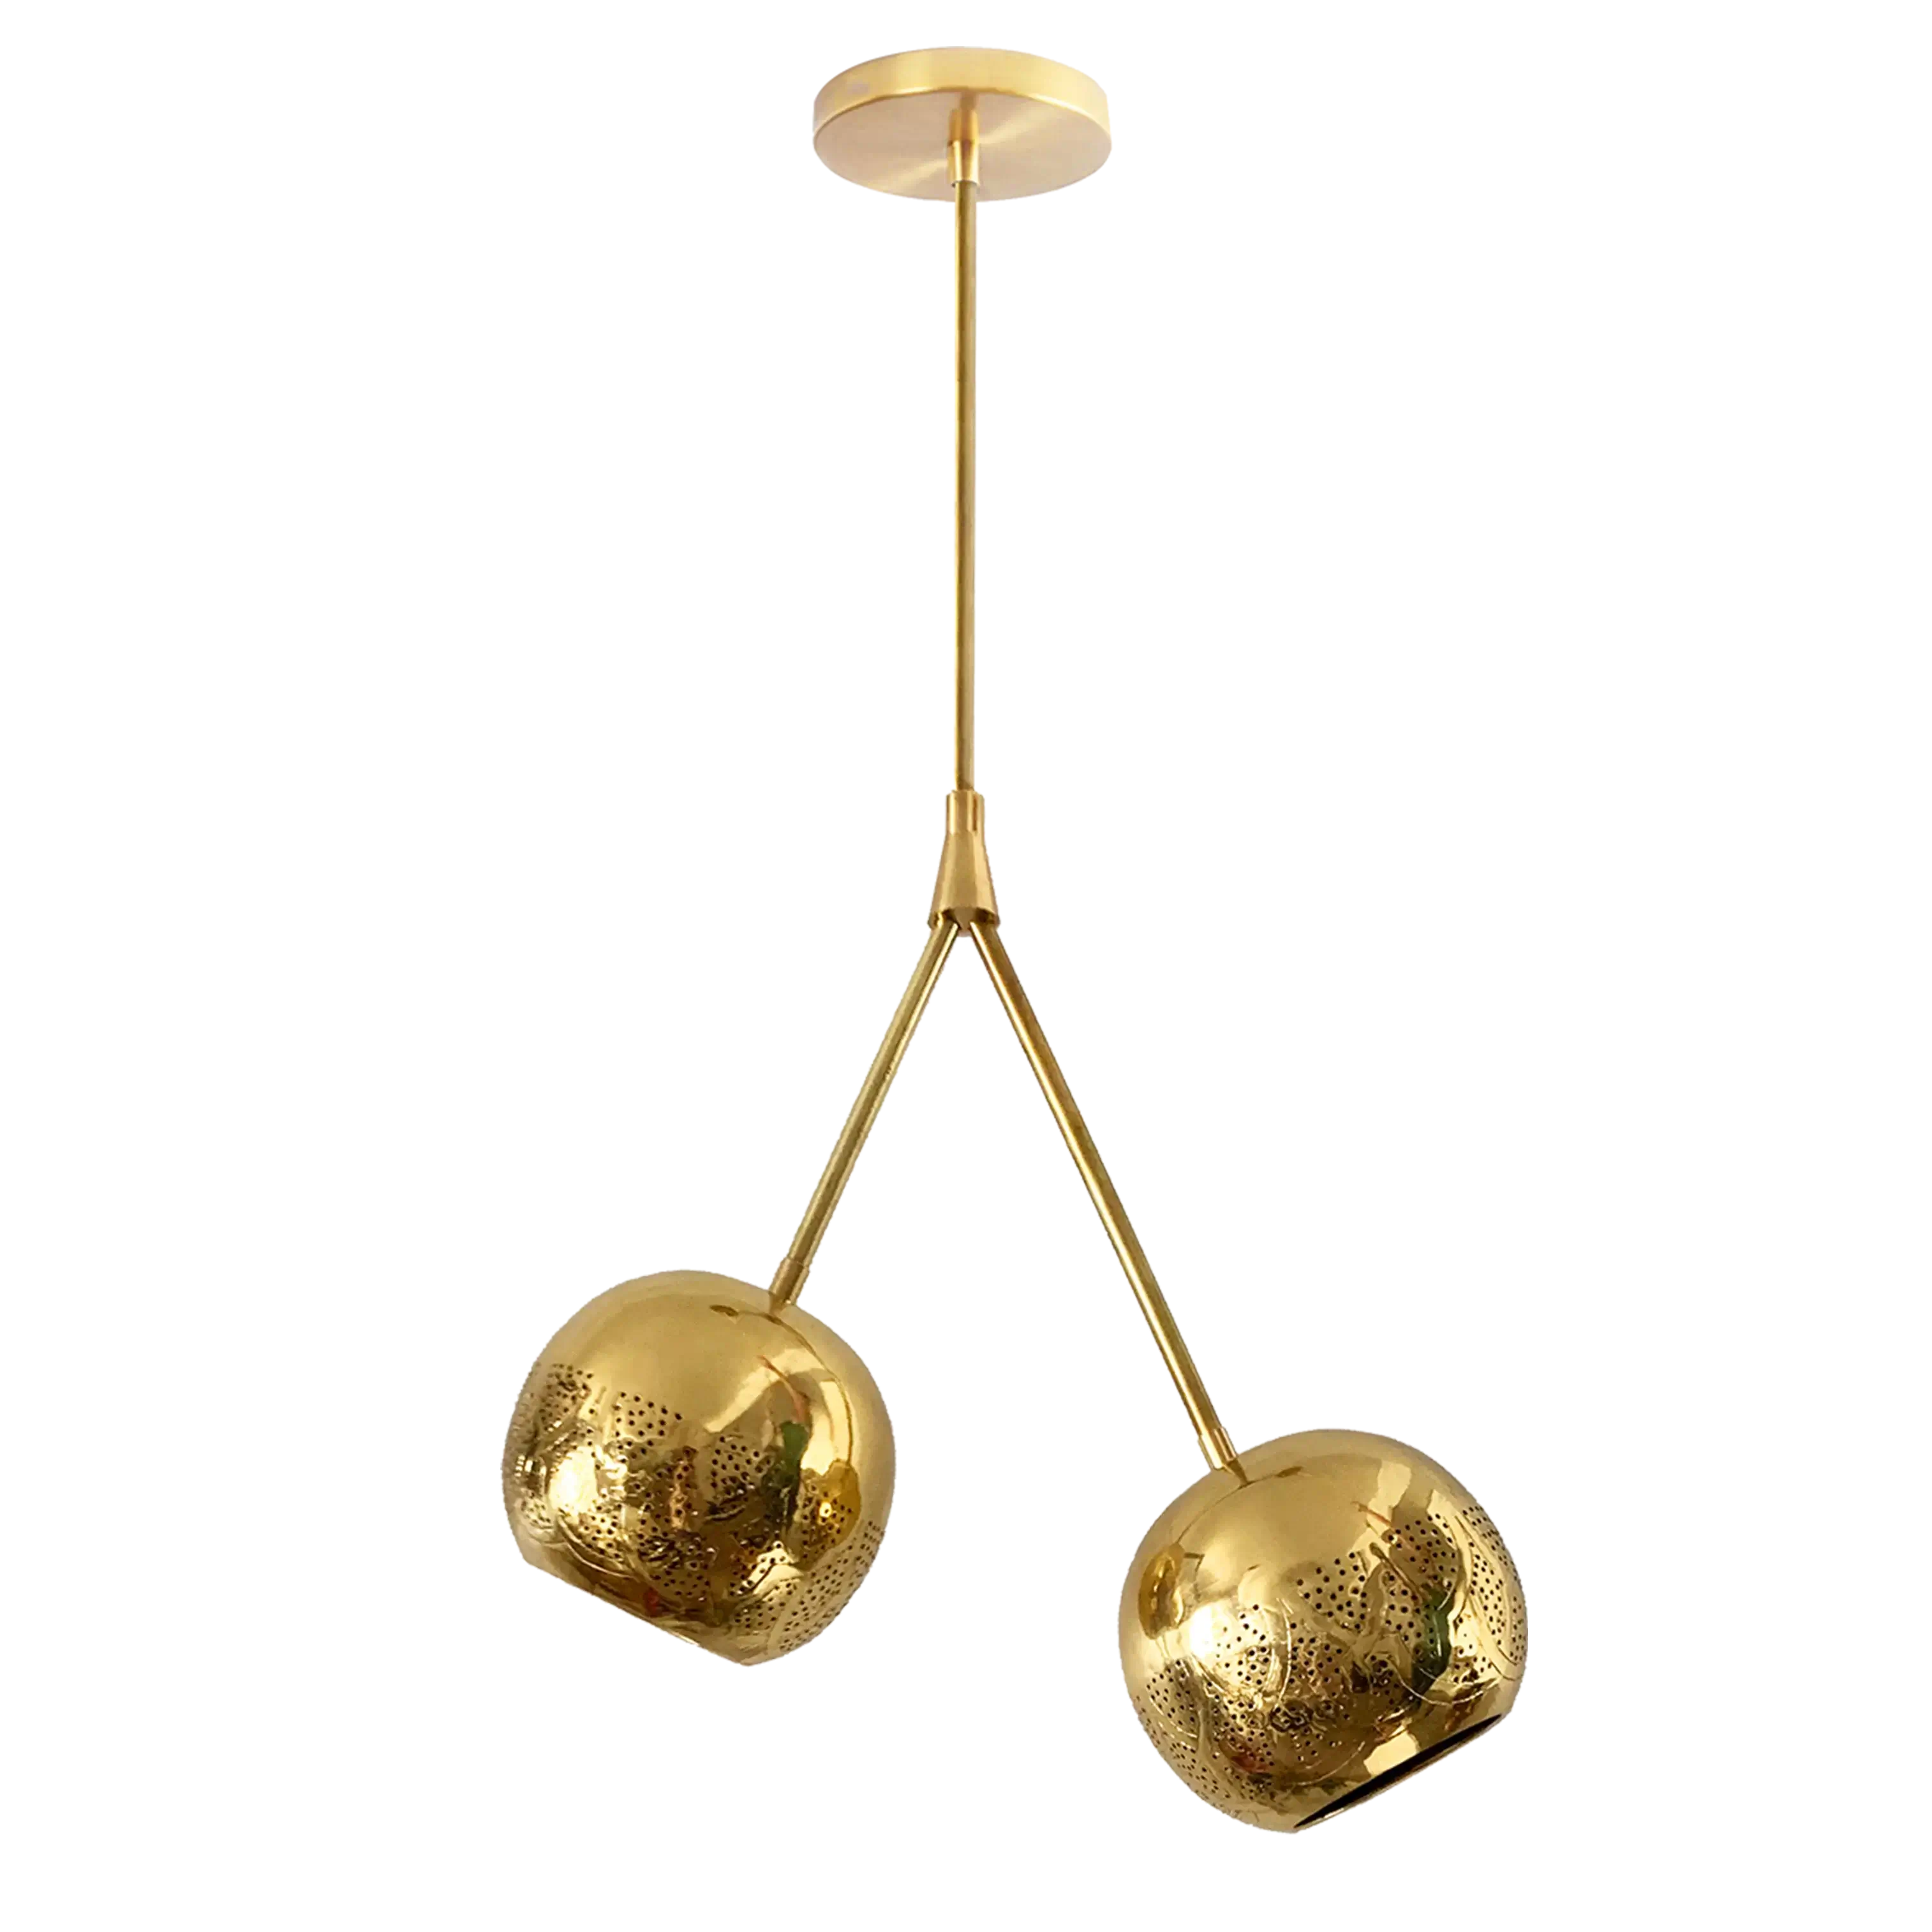 Dounia home Pendant light in Polished brass  made of Metal, Model: Nur mod twin